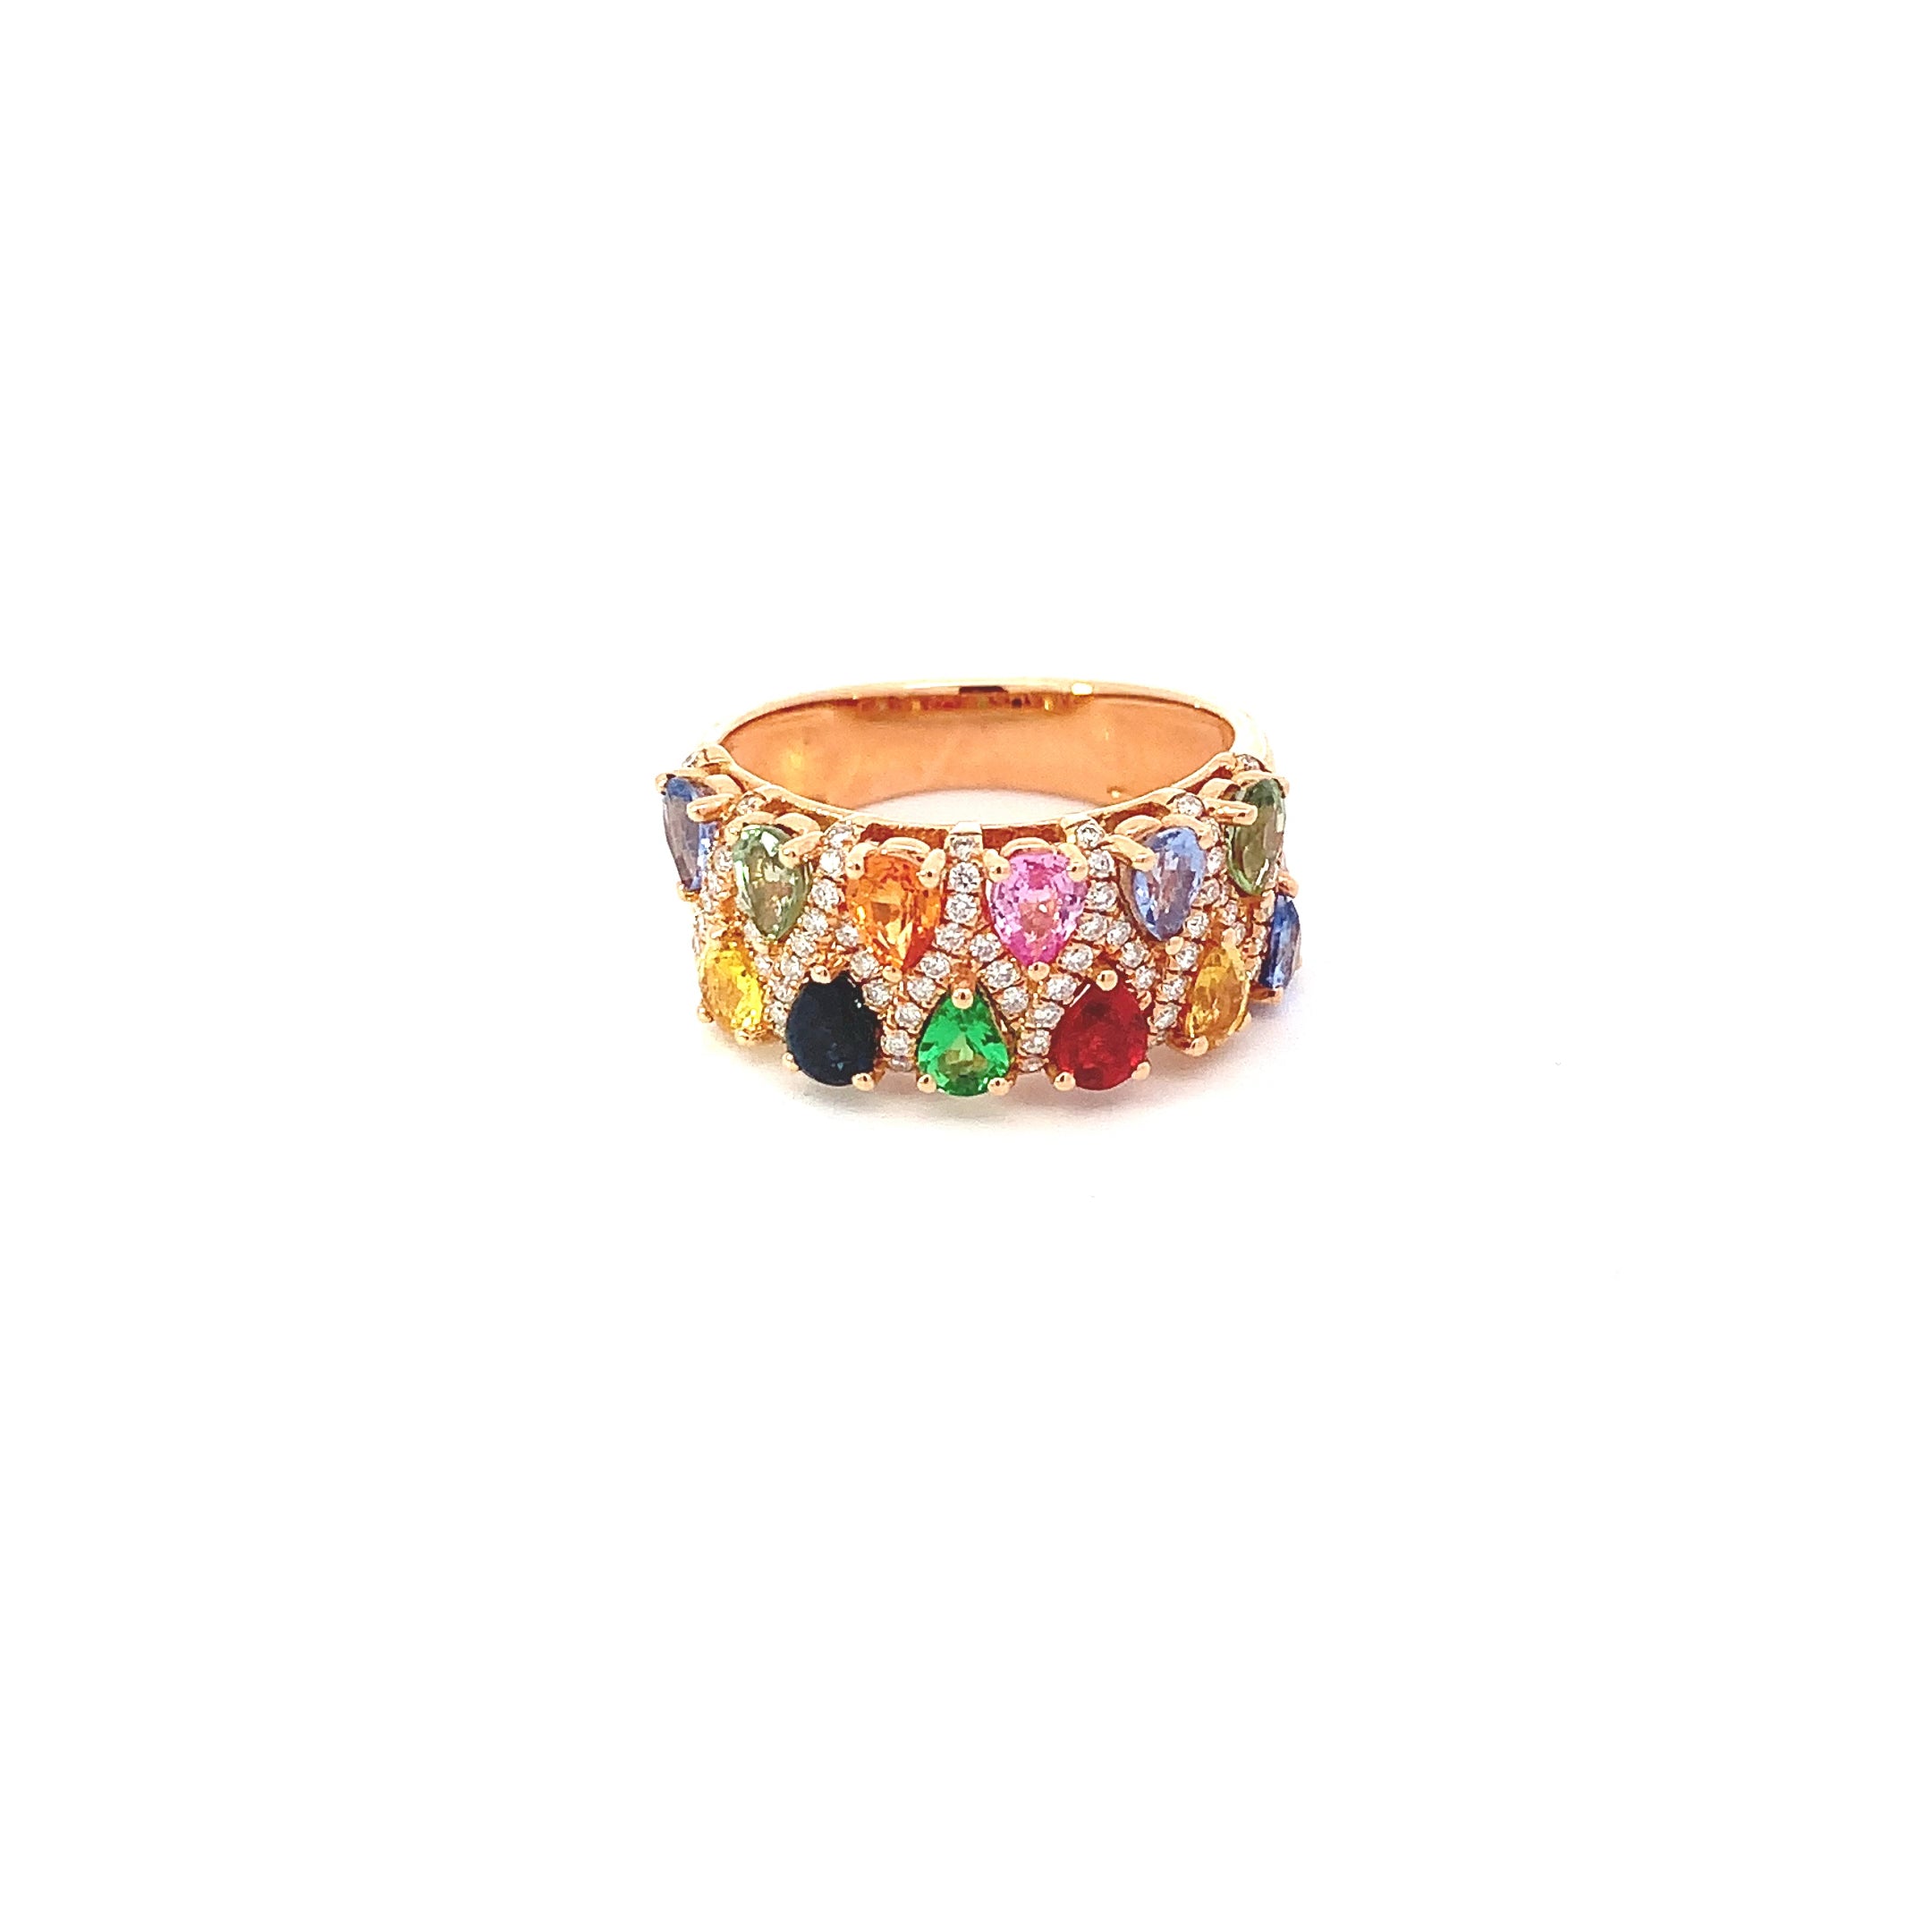 COLORED STONE AND DIAMOND RING